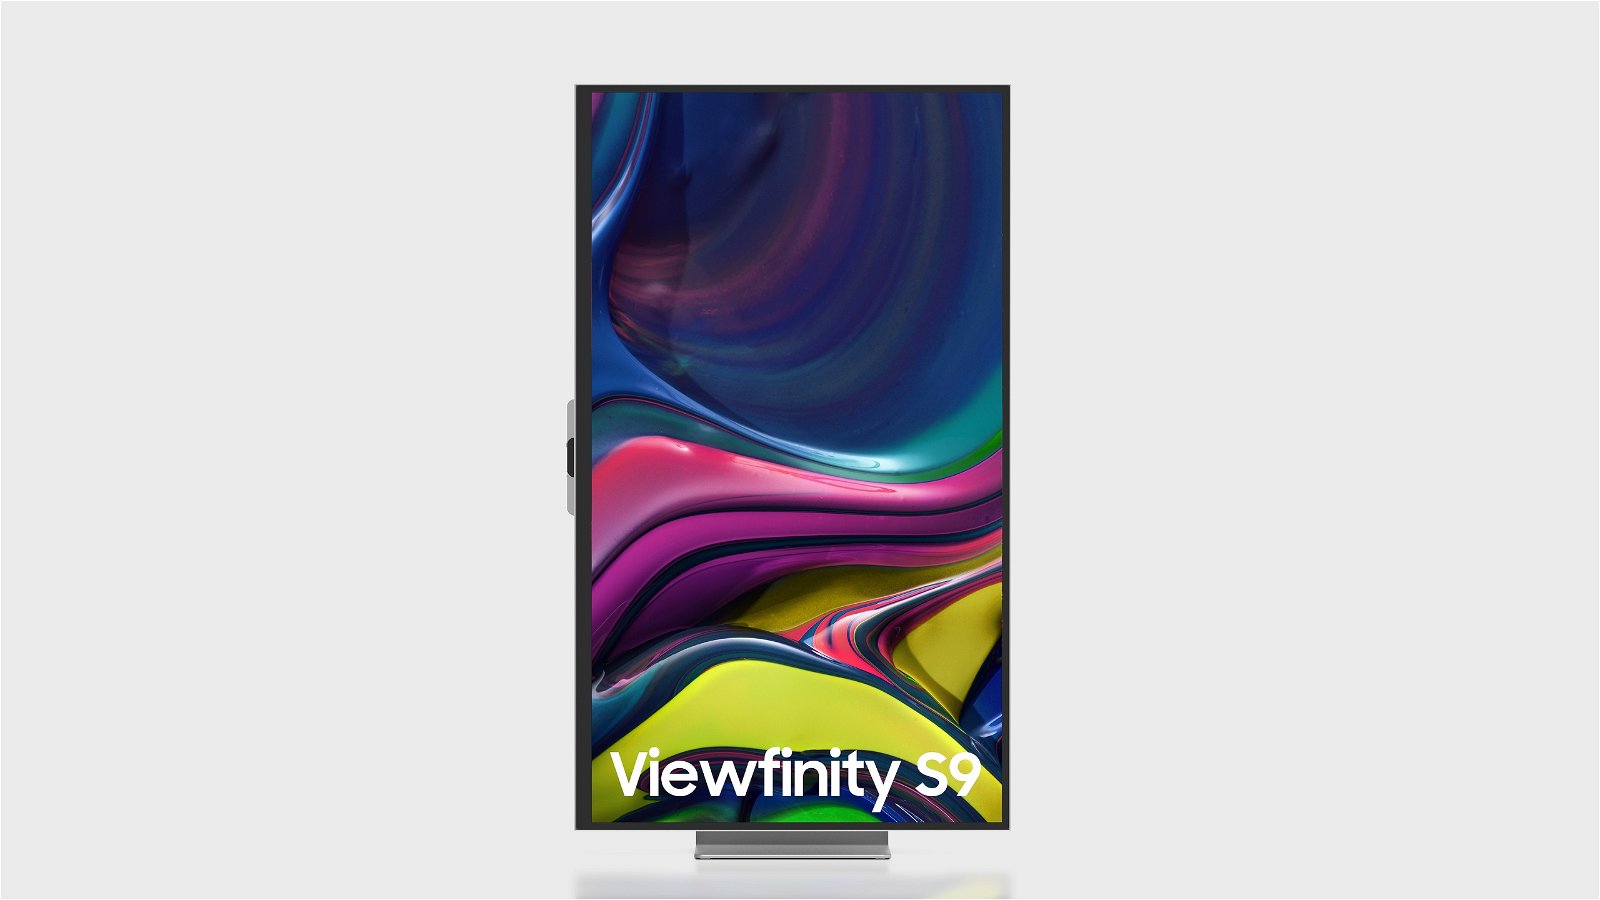 Samsung ViewFinity S9 vertical